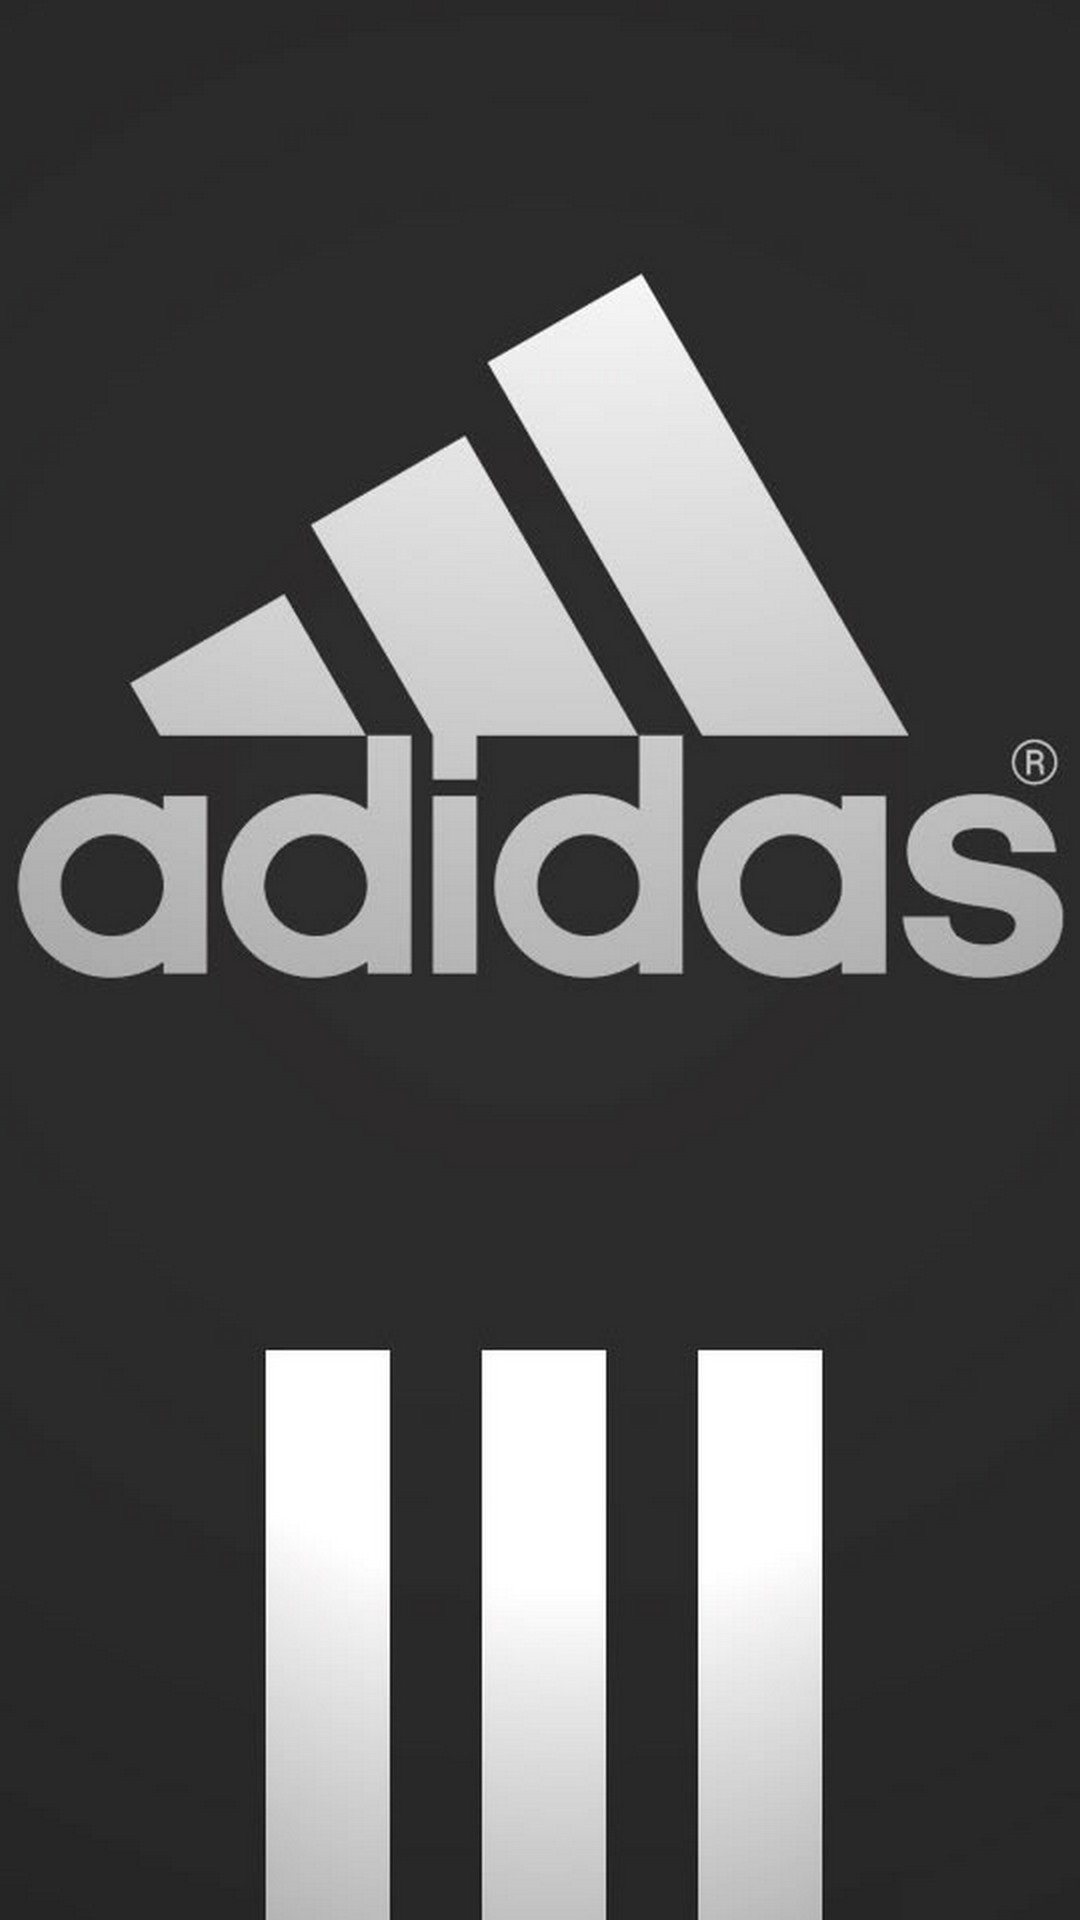 Logo Adidas iPhone Wallpaper with high-resolution 1080x1920 pixel. You can use this wallpaper for your iPhone 5, 6, 7, 8, X, XS, XR backgrounds, Mobile Screensaver, or iPad Lock Screen